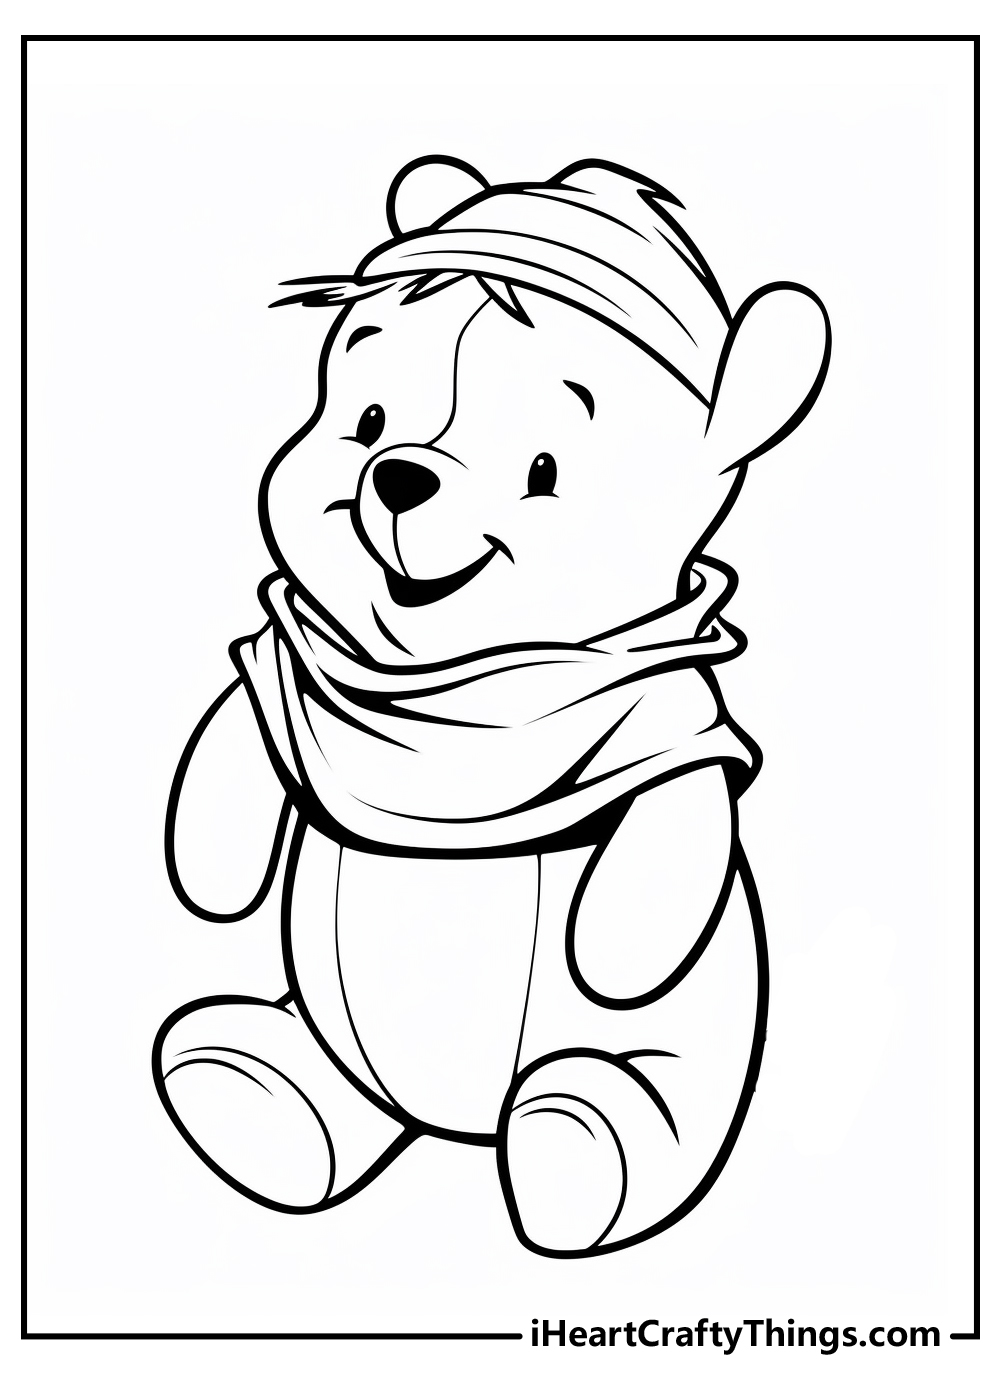 Winnie the Pooh Coloring Sheet for Kids